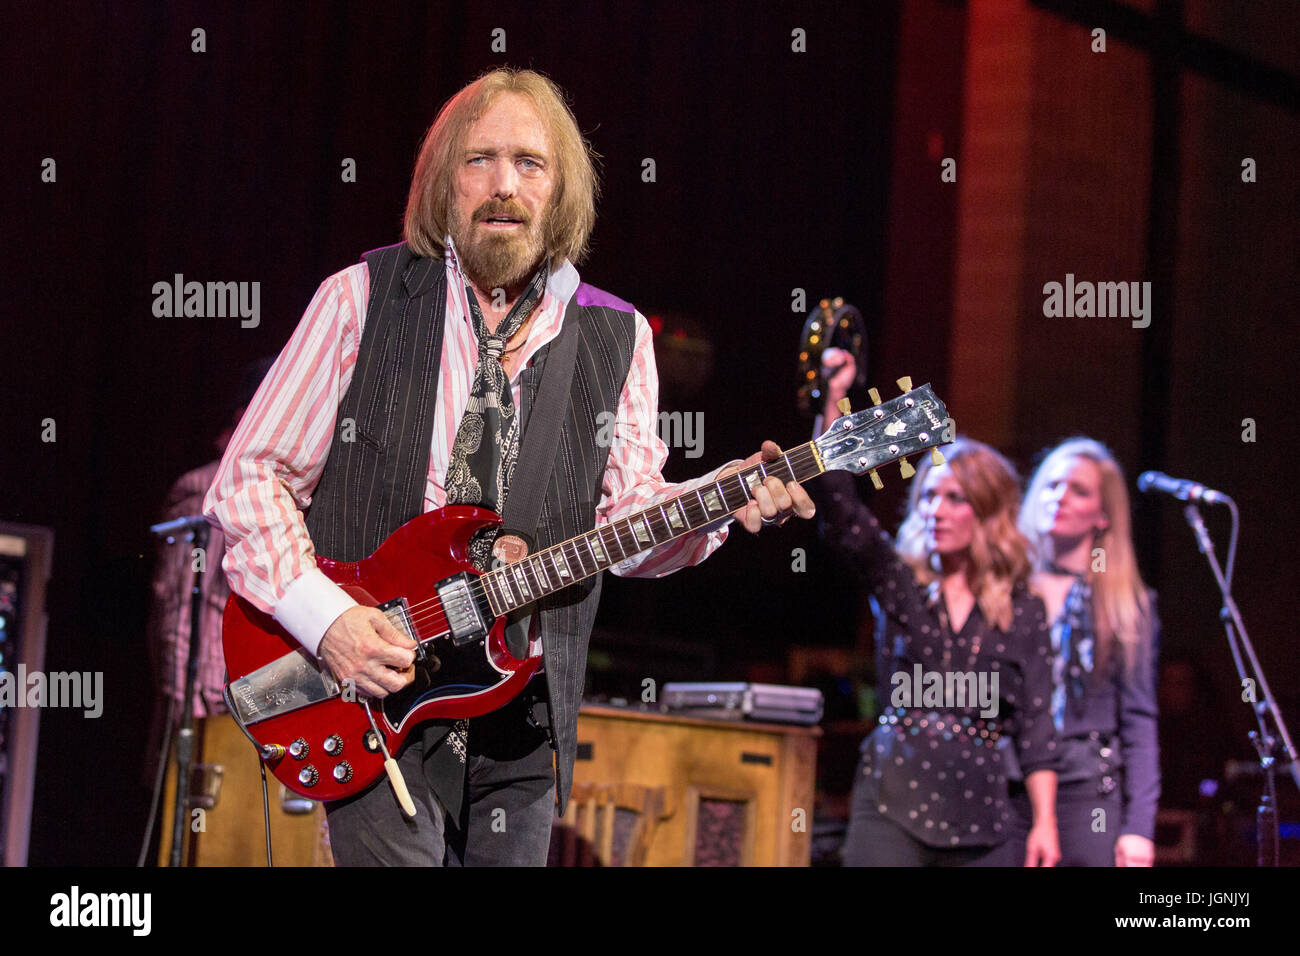 Milwaukee, Wisconsin, USA. 6th July, 2017. TOM PETTY, CHARLEY WEBB and HATTIE WEBB of Tom Petty and the Heartbreakers performs live at Henry Maier Festival Park during Summerfest in Milwaukee, Wisconsin Credit: Daniel DeSlover/ZUMA Wire/Alamy Live News Stock Photo